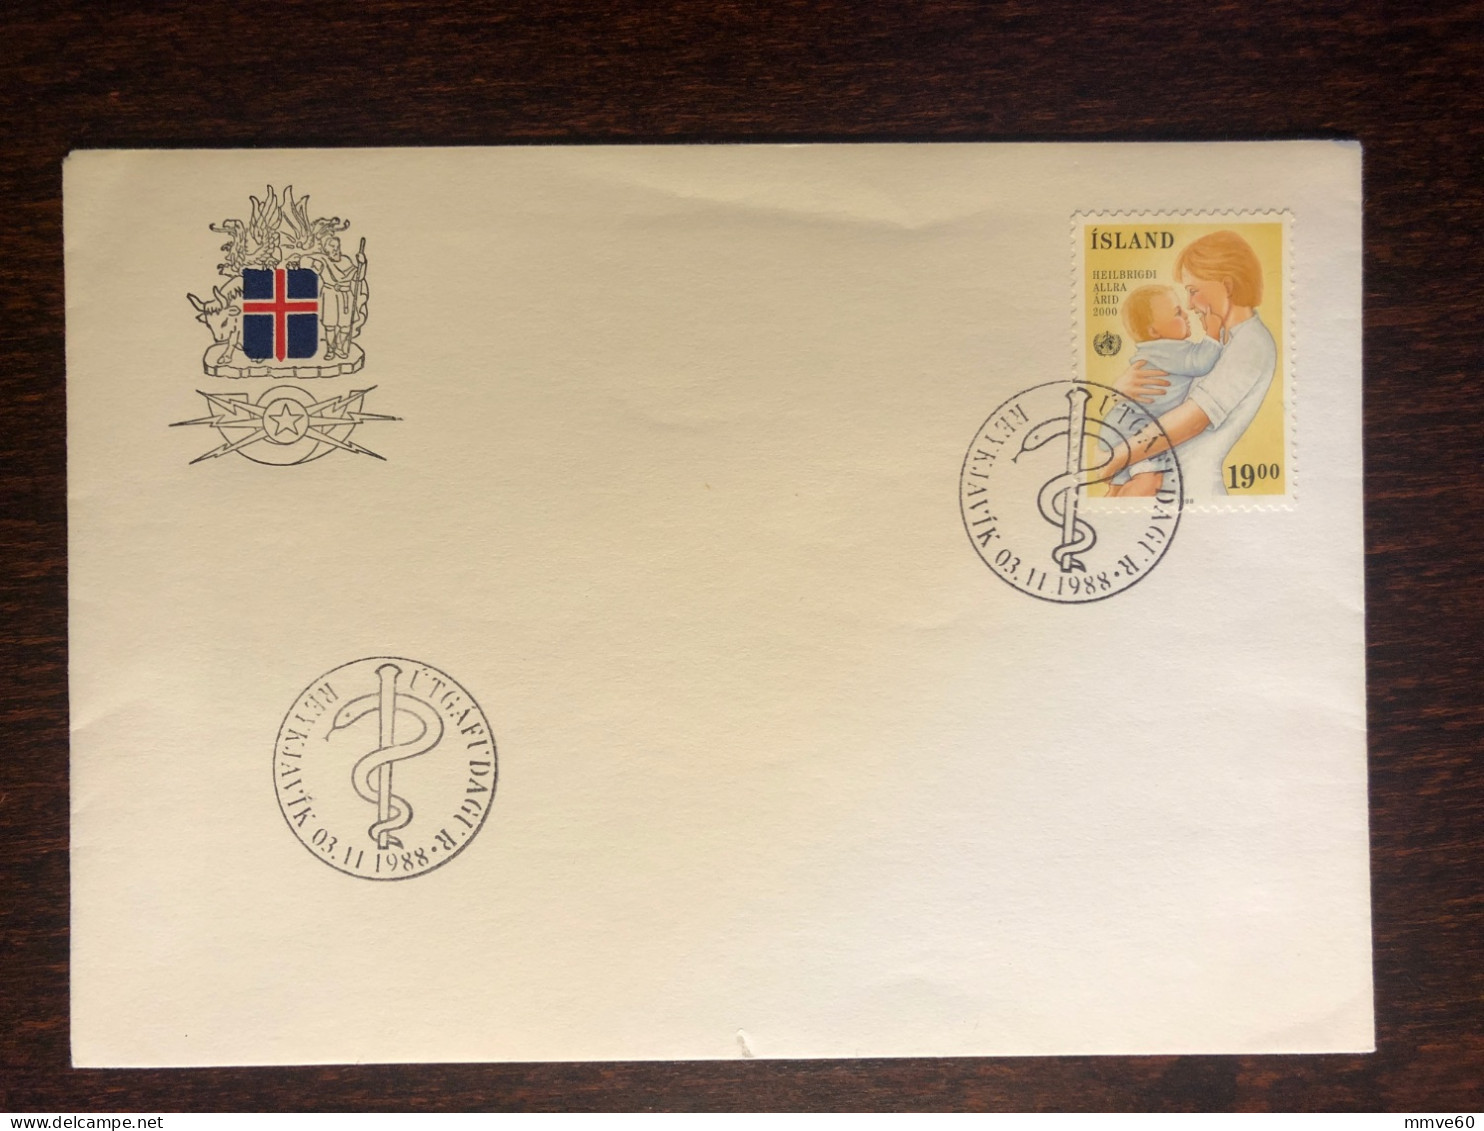 ICELAND FDC COVER 1988 YEAR WHO OMS HEALTH MEDICINE STAMPS - FDC